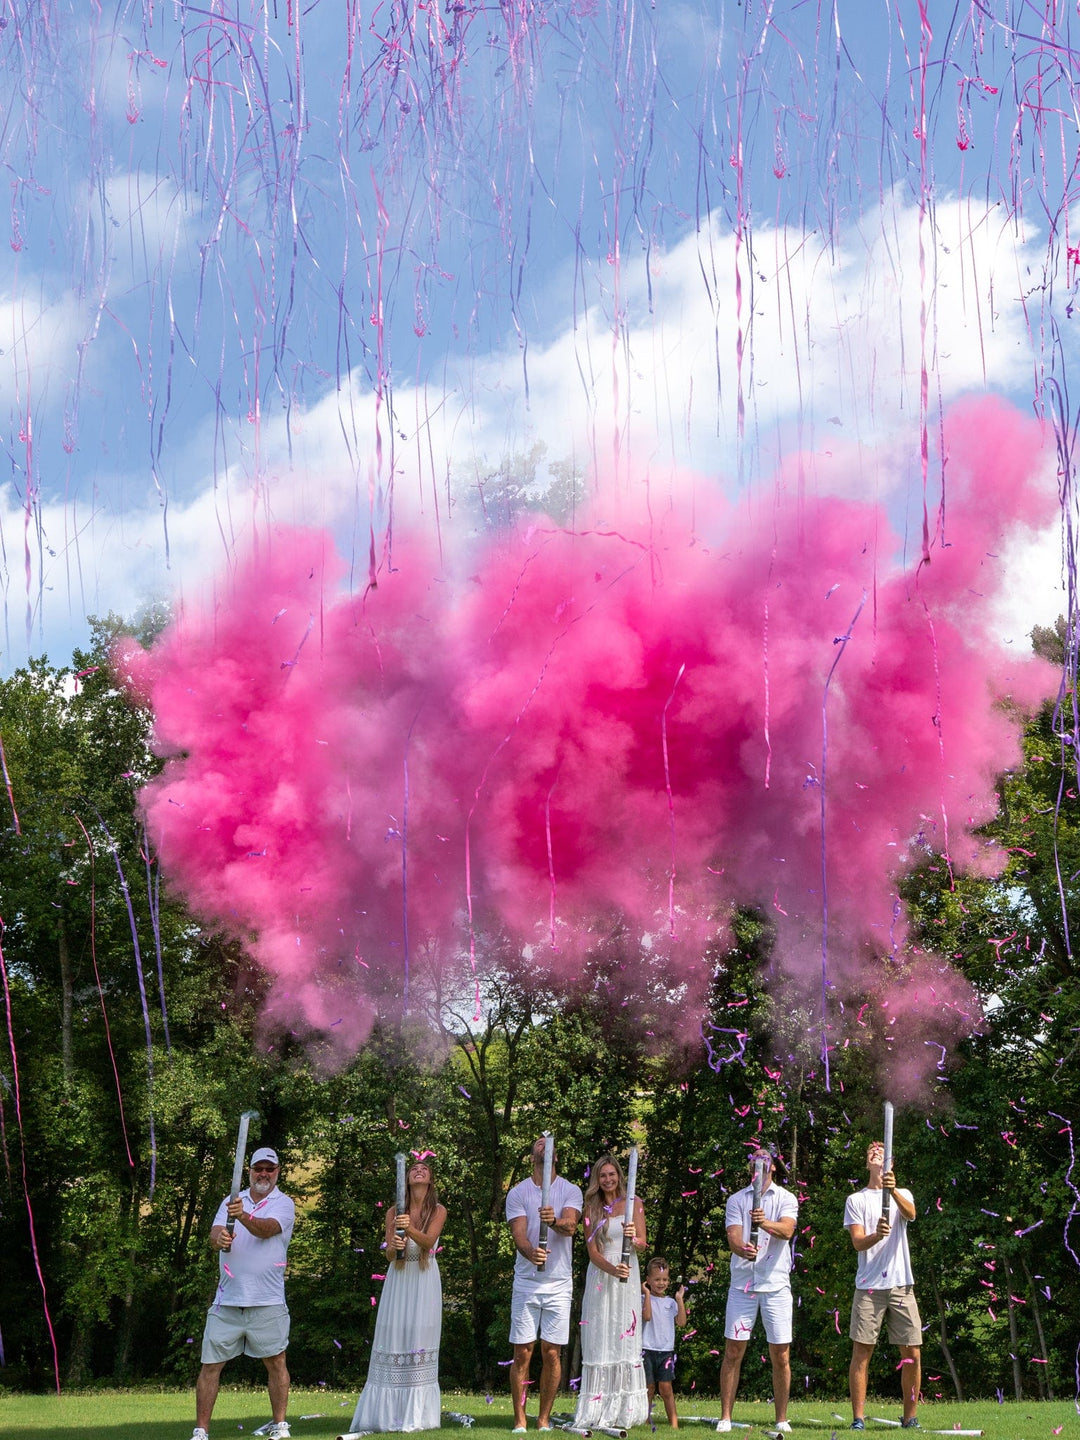 Baby Gender Reveal Streamer Cannon Pink Purple Blue Green – POOF THERE IT  IS!